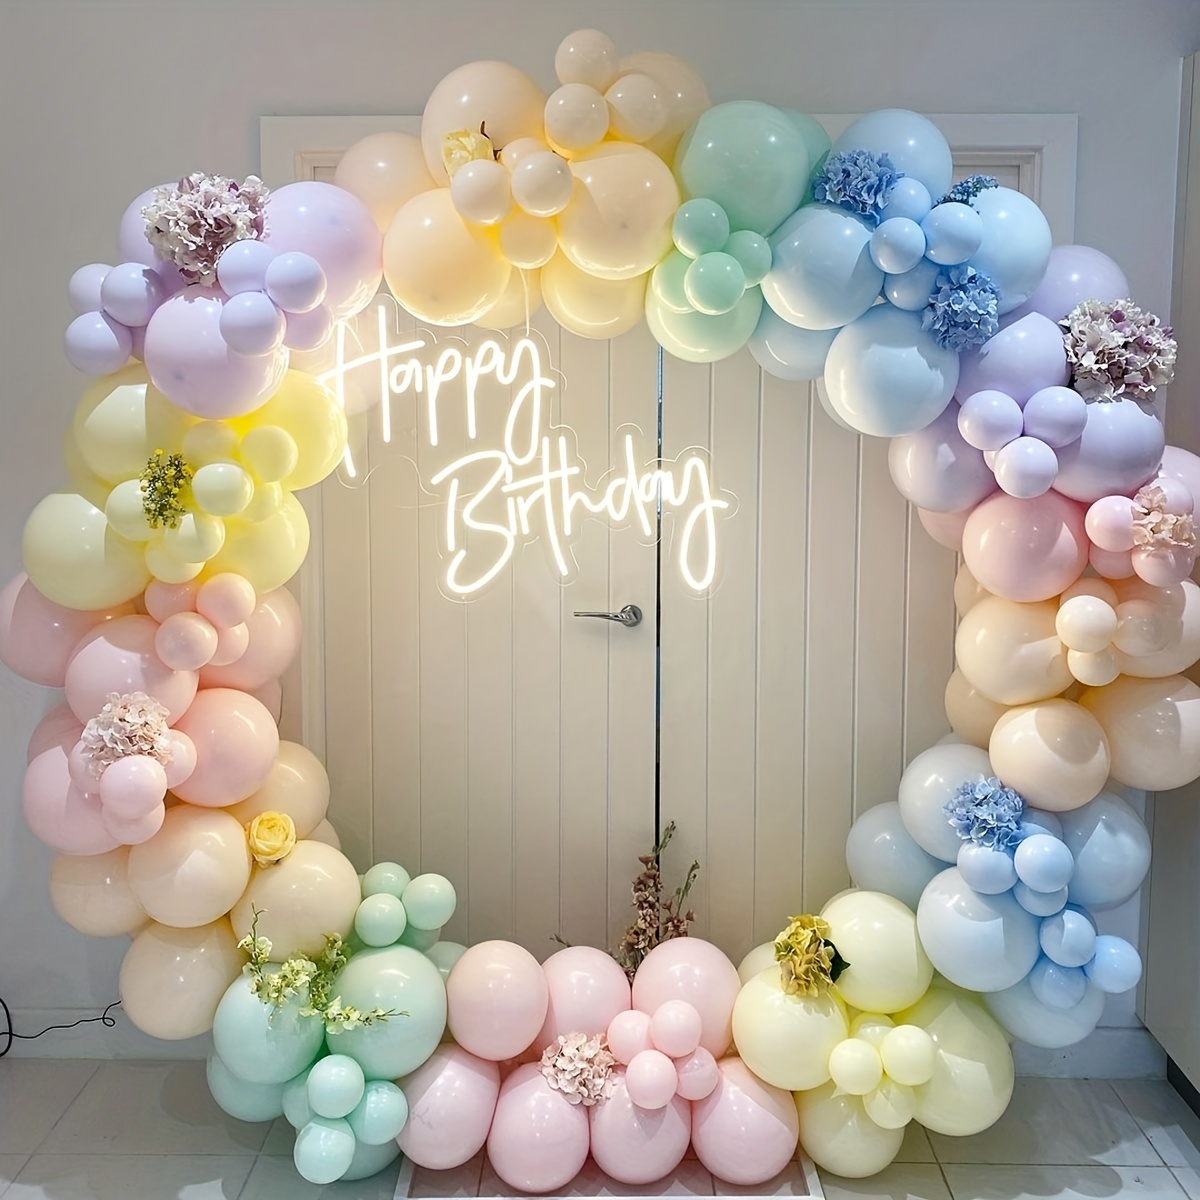 

160pcs Pastel Balloon Garland Arch Kit For Weddings, Birthdays, Gender Reveals & More - Versatile Emulsion Balloons Set For Party Decorations, Applicable For Ages 14+ Without Electricity Use